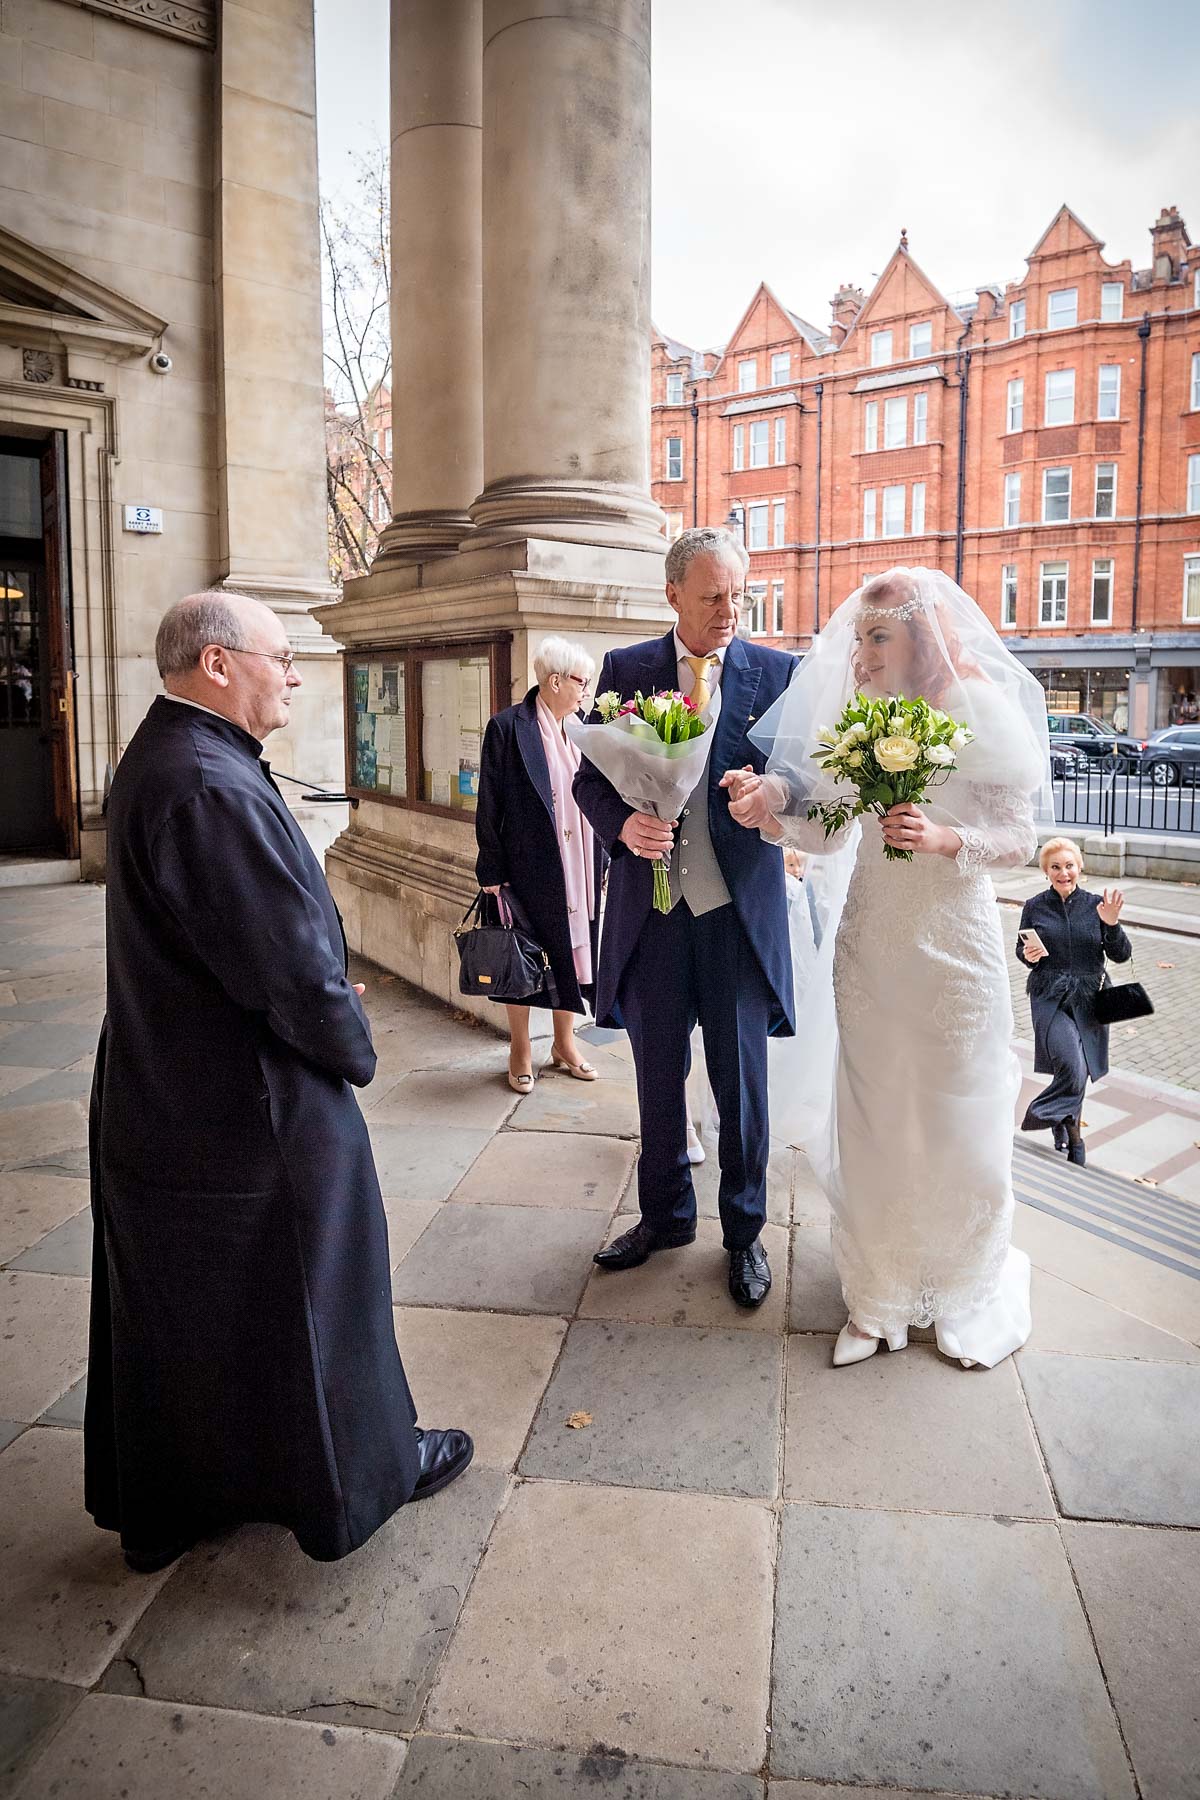 The Head Sacristan greets the bride and her father on the steps of Brompton Oratory